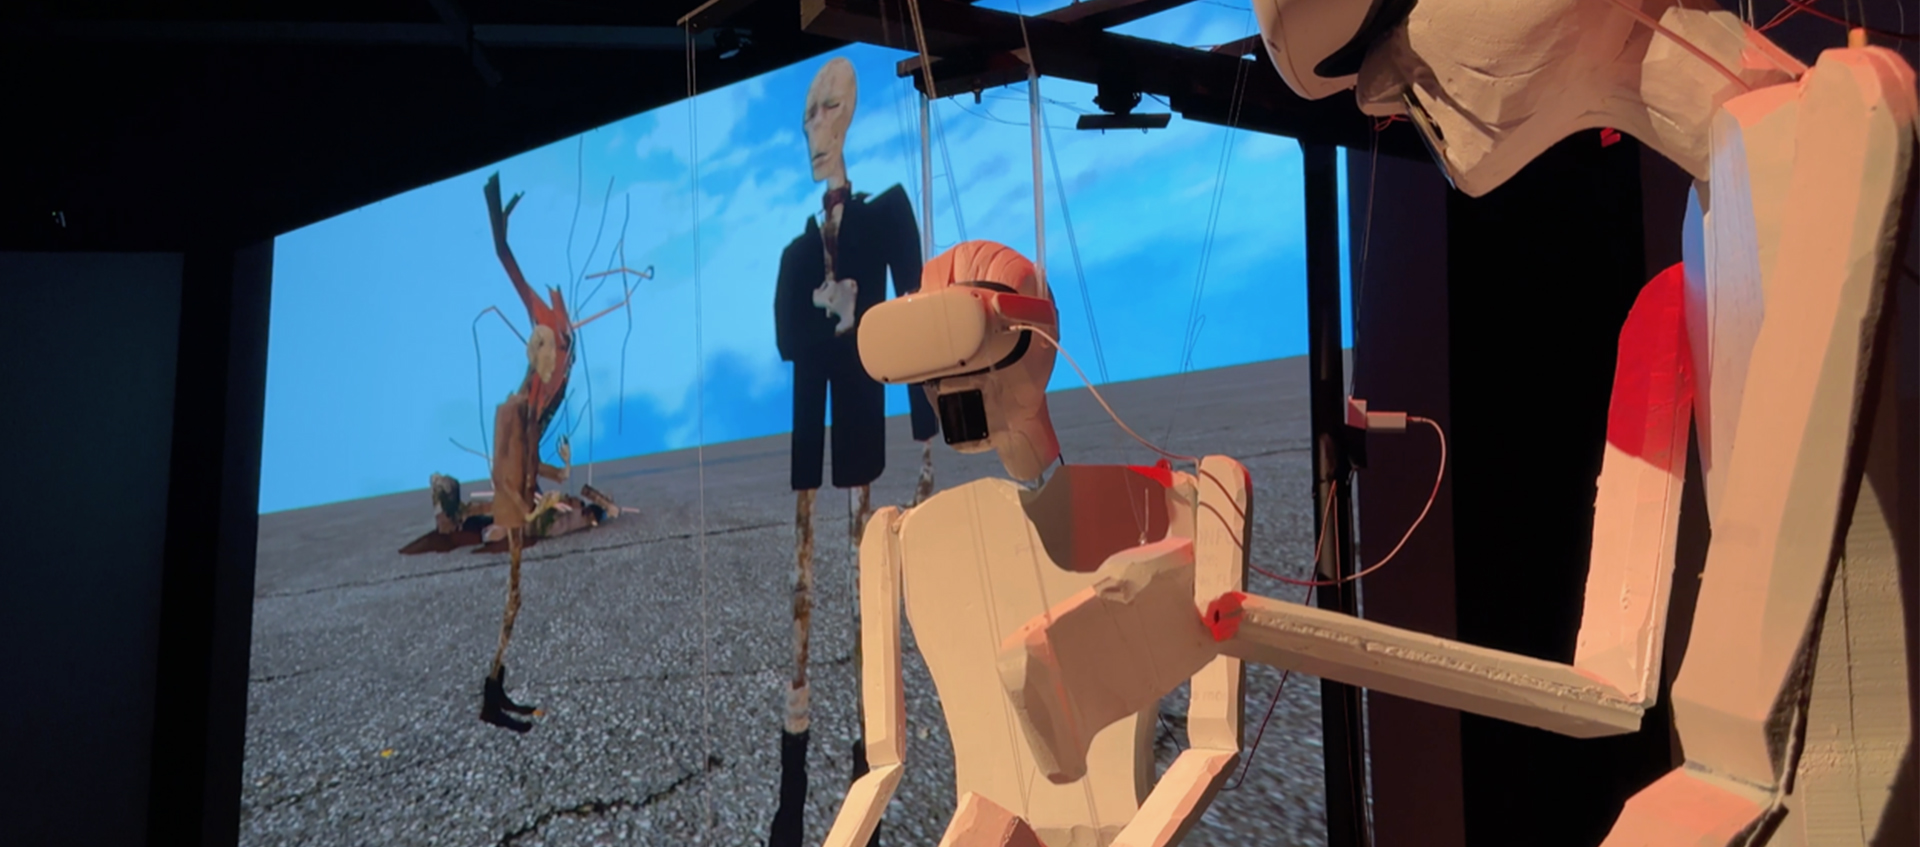 Two marionette robots wearing virtual reality visors stand in front of a screen